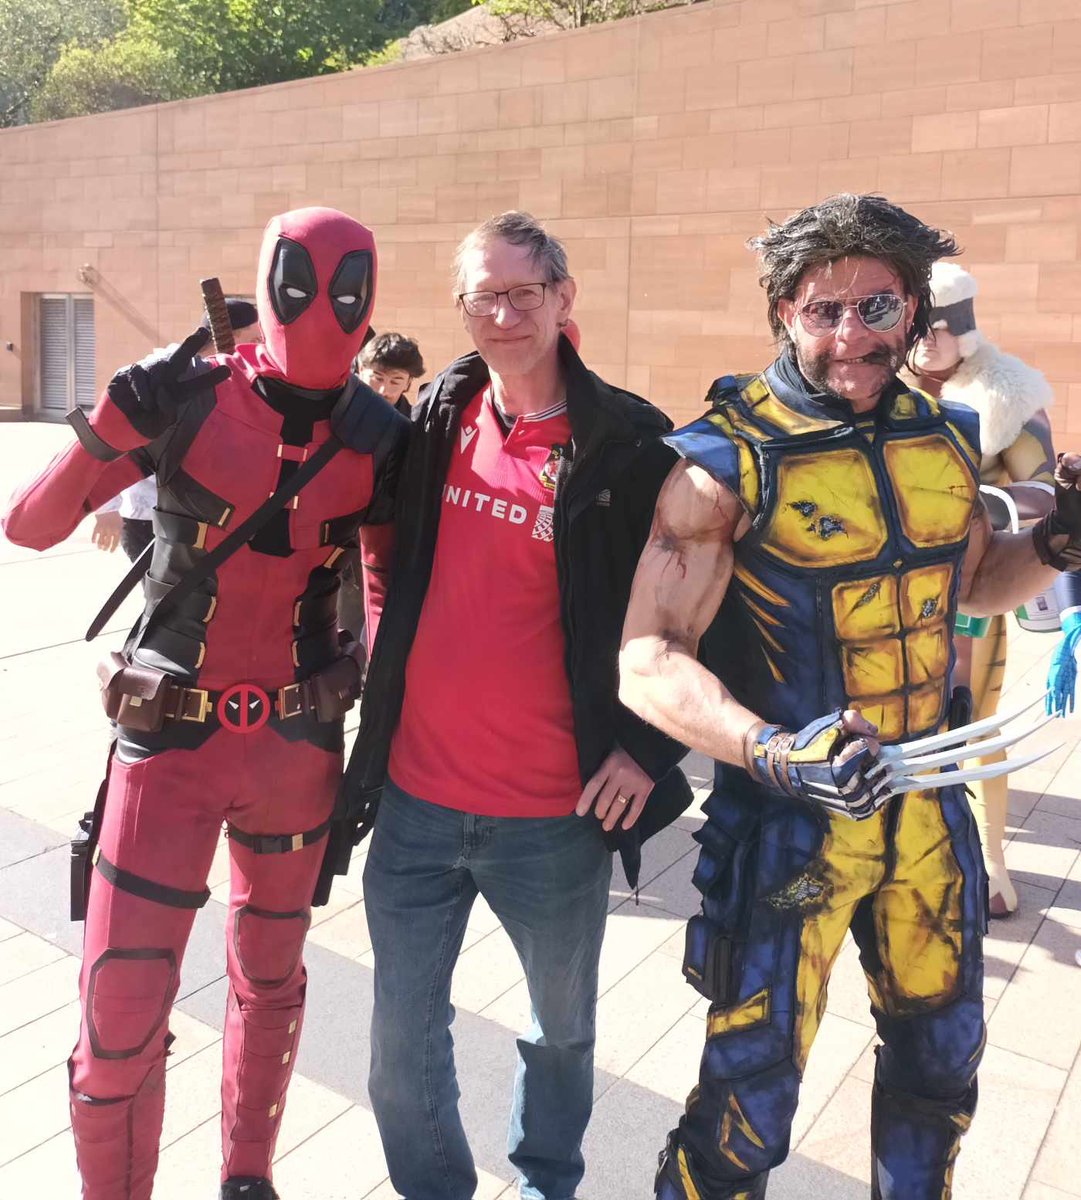 Trip to Liverpool after the Crewe match and bumped into these guys 🤣 @Wrexham_AFC @VancityReynolds @RealHughJackman